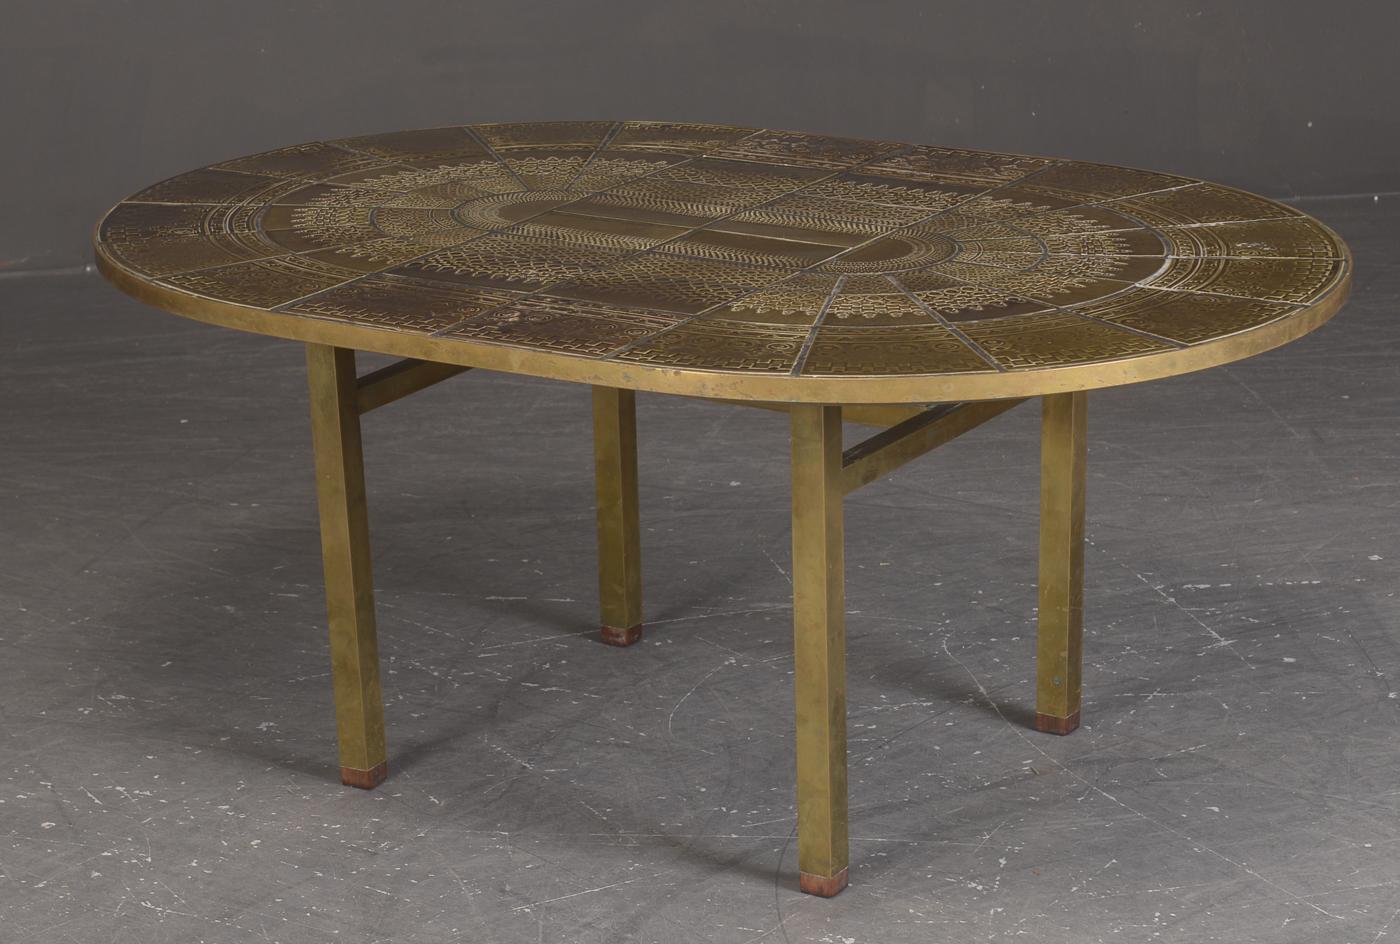 Bjorn Wiinblad (1918-2006). Unique Oval coffee table, frame and edging in brass, table top with green decorated tiles by Biorn Winblad. Measures: 120 x 87 cm. H. 52 cm.
Bjørn Wiinblad (20 September 1919 – 8 June 2006), was a Danish painter, designer